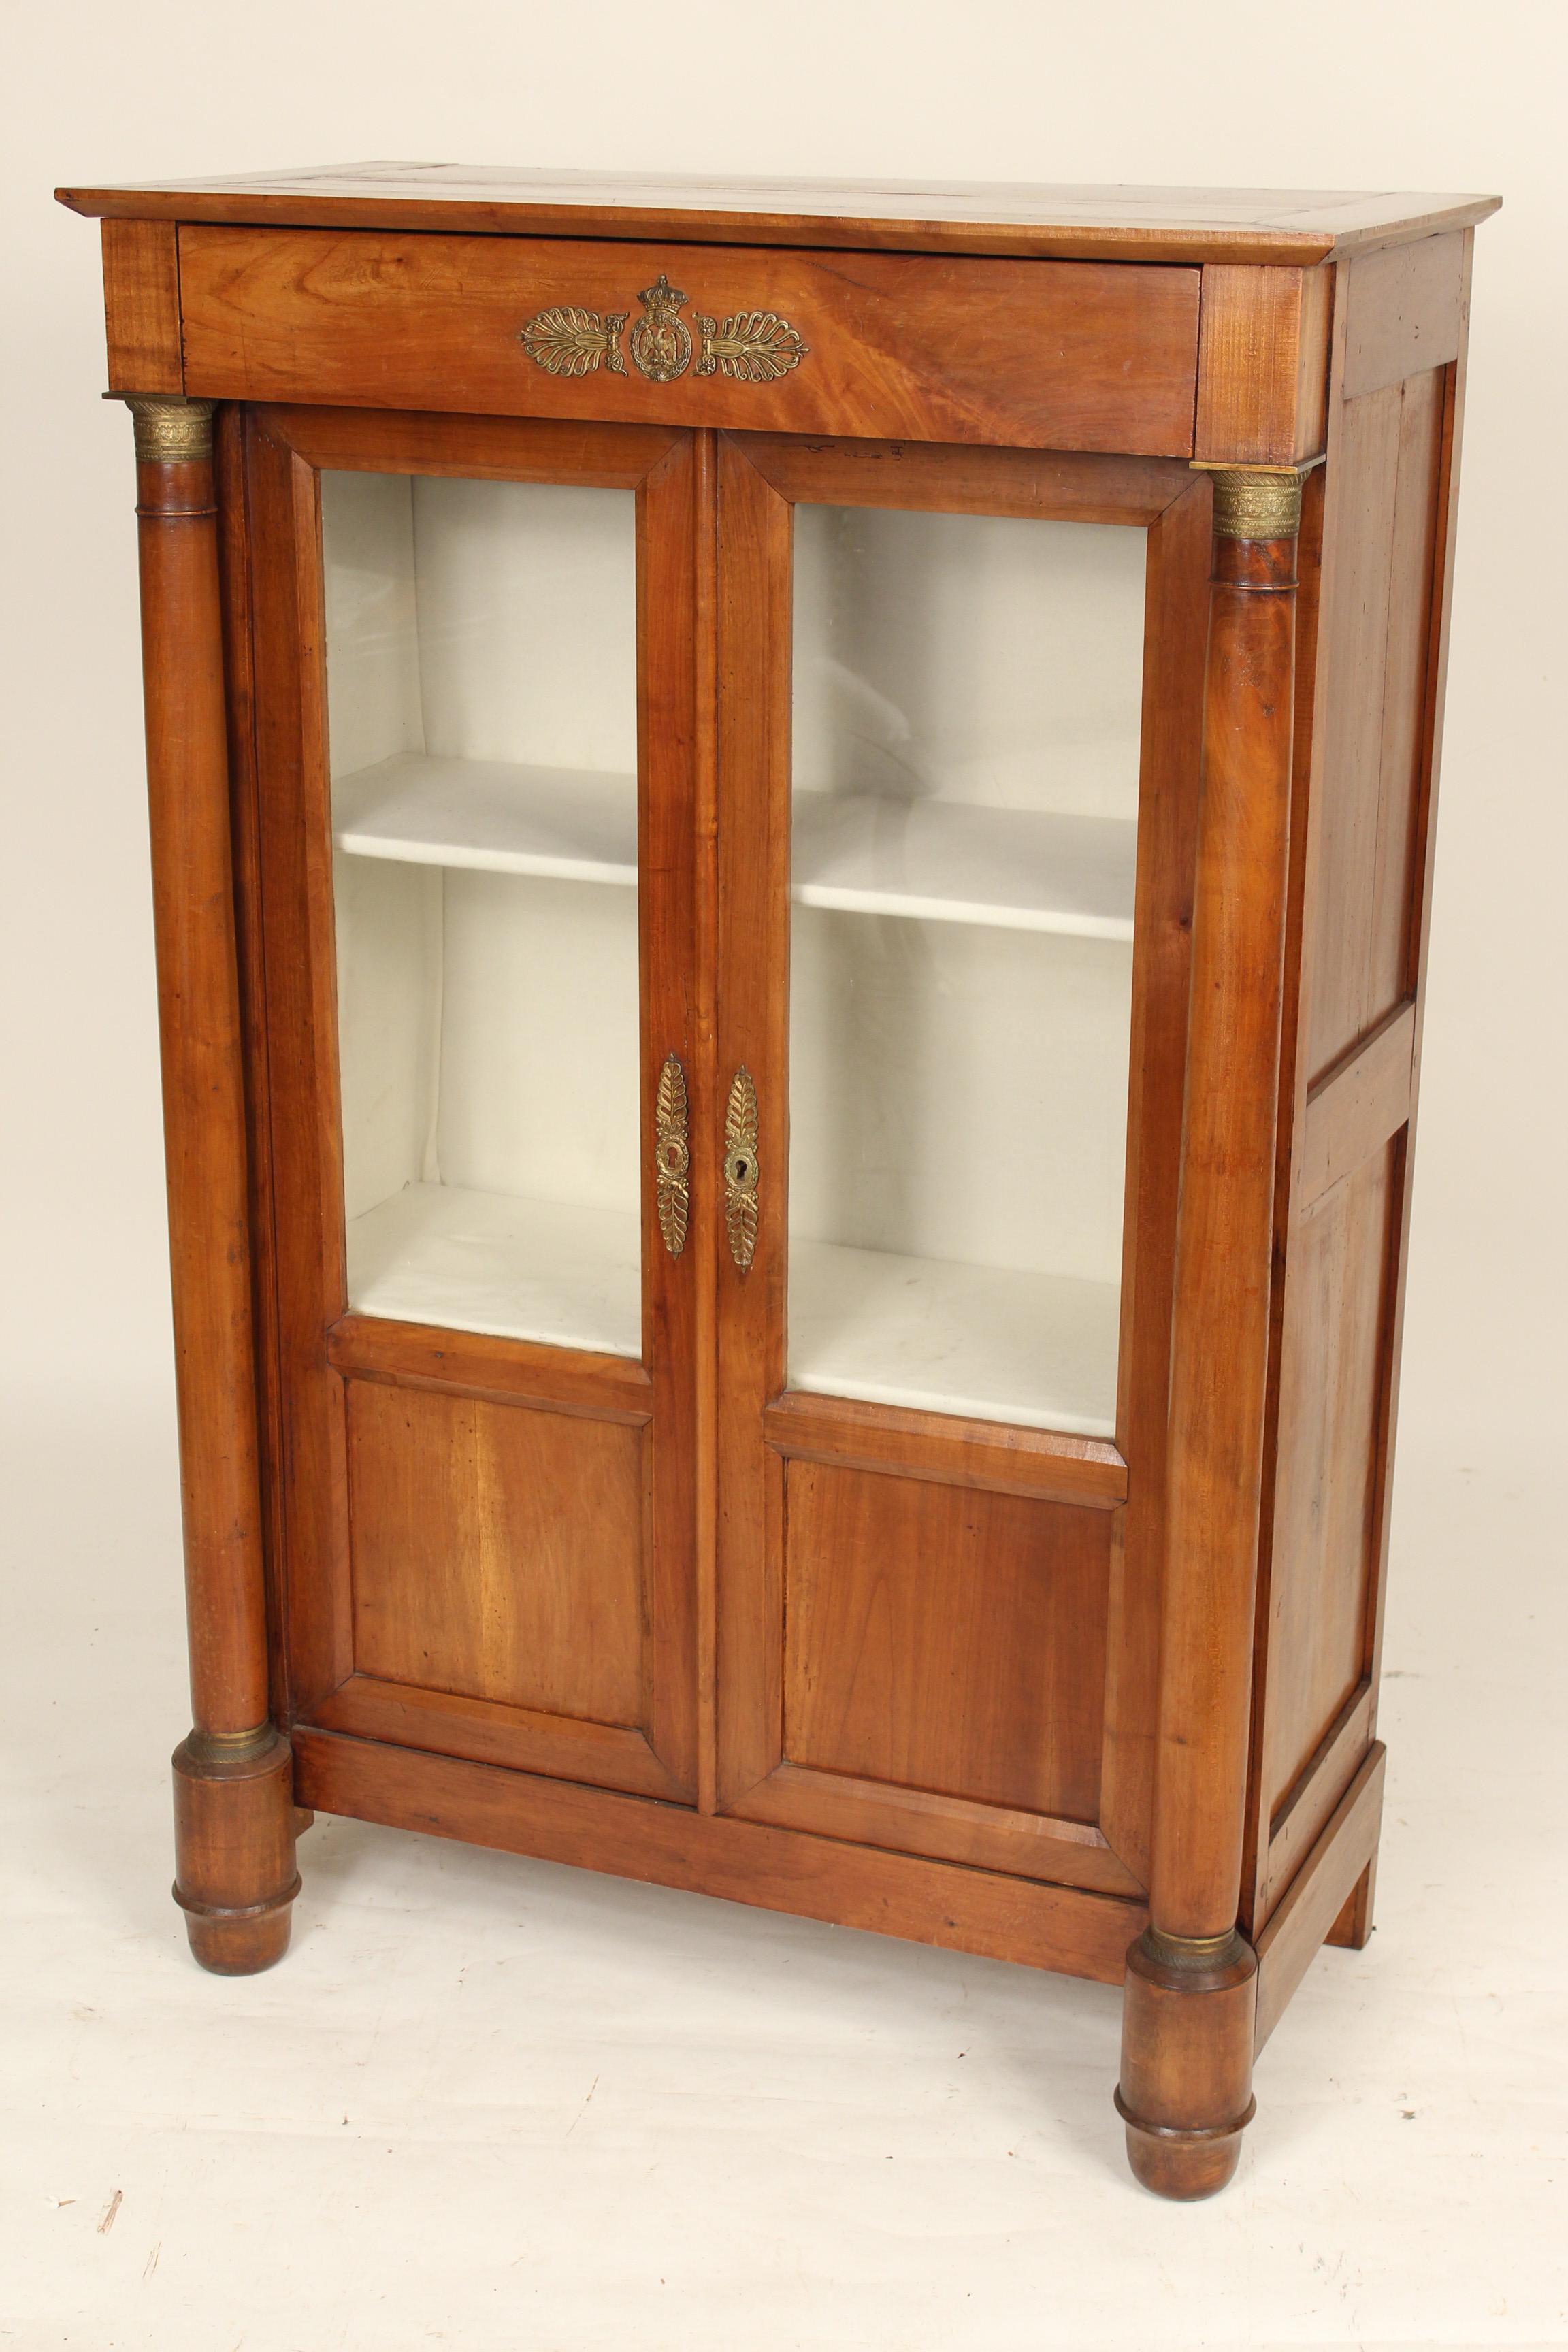 European Antique Empire Style Bookcase/ Display Cabinet